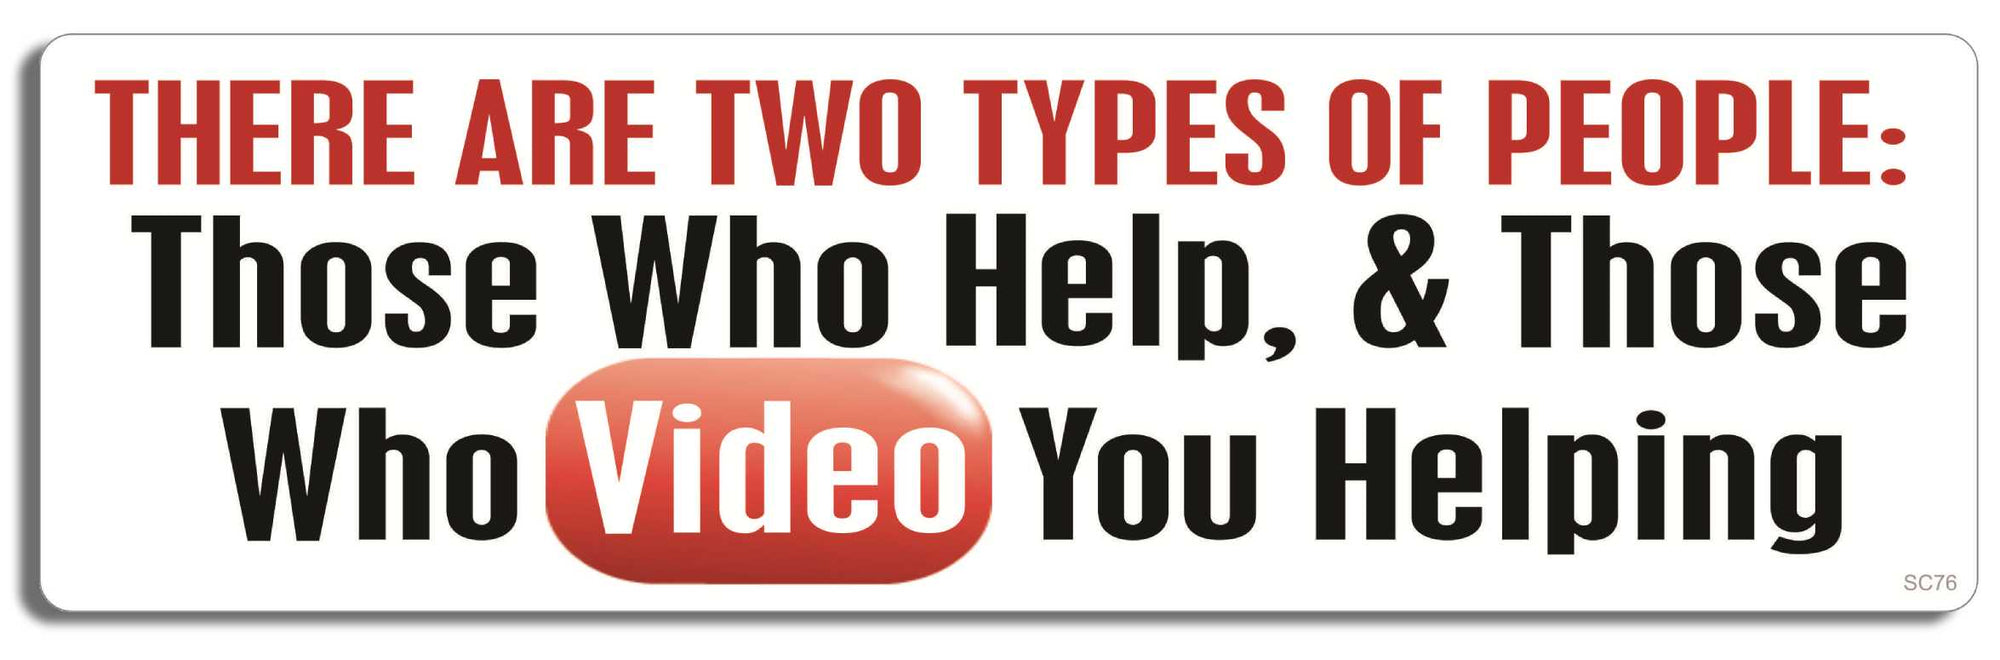 There are two types of people, those who help and those who video you helping - 3" x 10" Bumper Sticker--Car Magnet- -  Decal Bumper Sticker-political Bumper Sticker Car Magnet There are two types of people, those-  Decal for carsconservative, liberal, Political